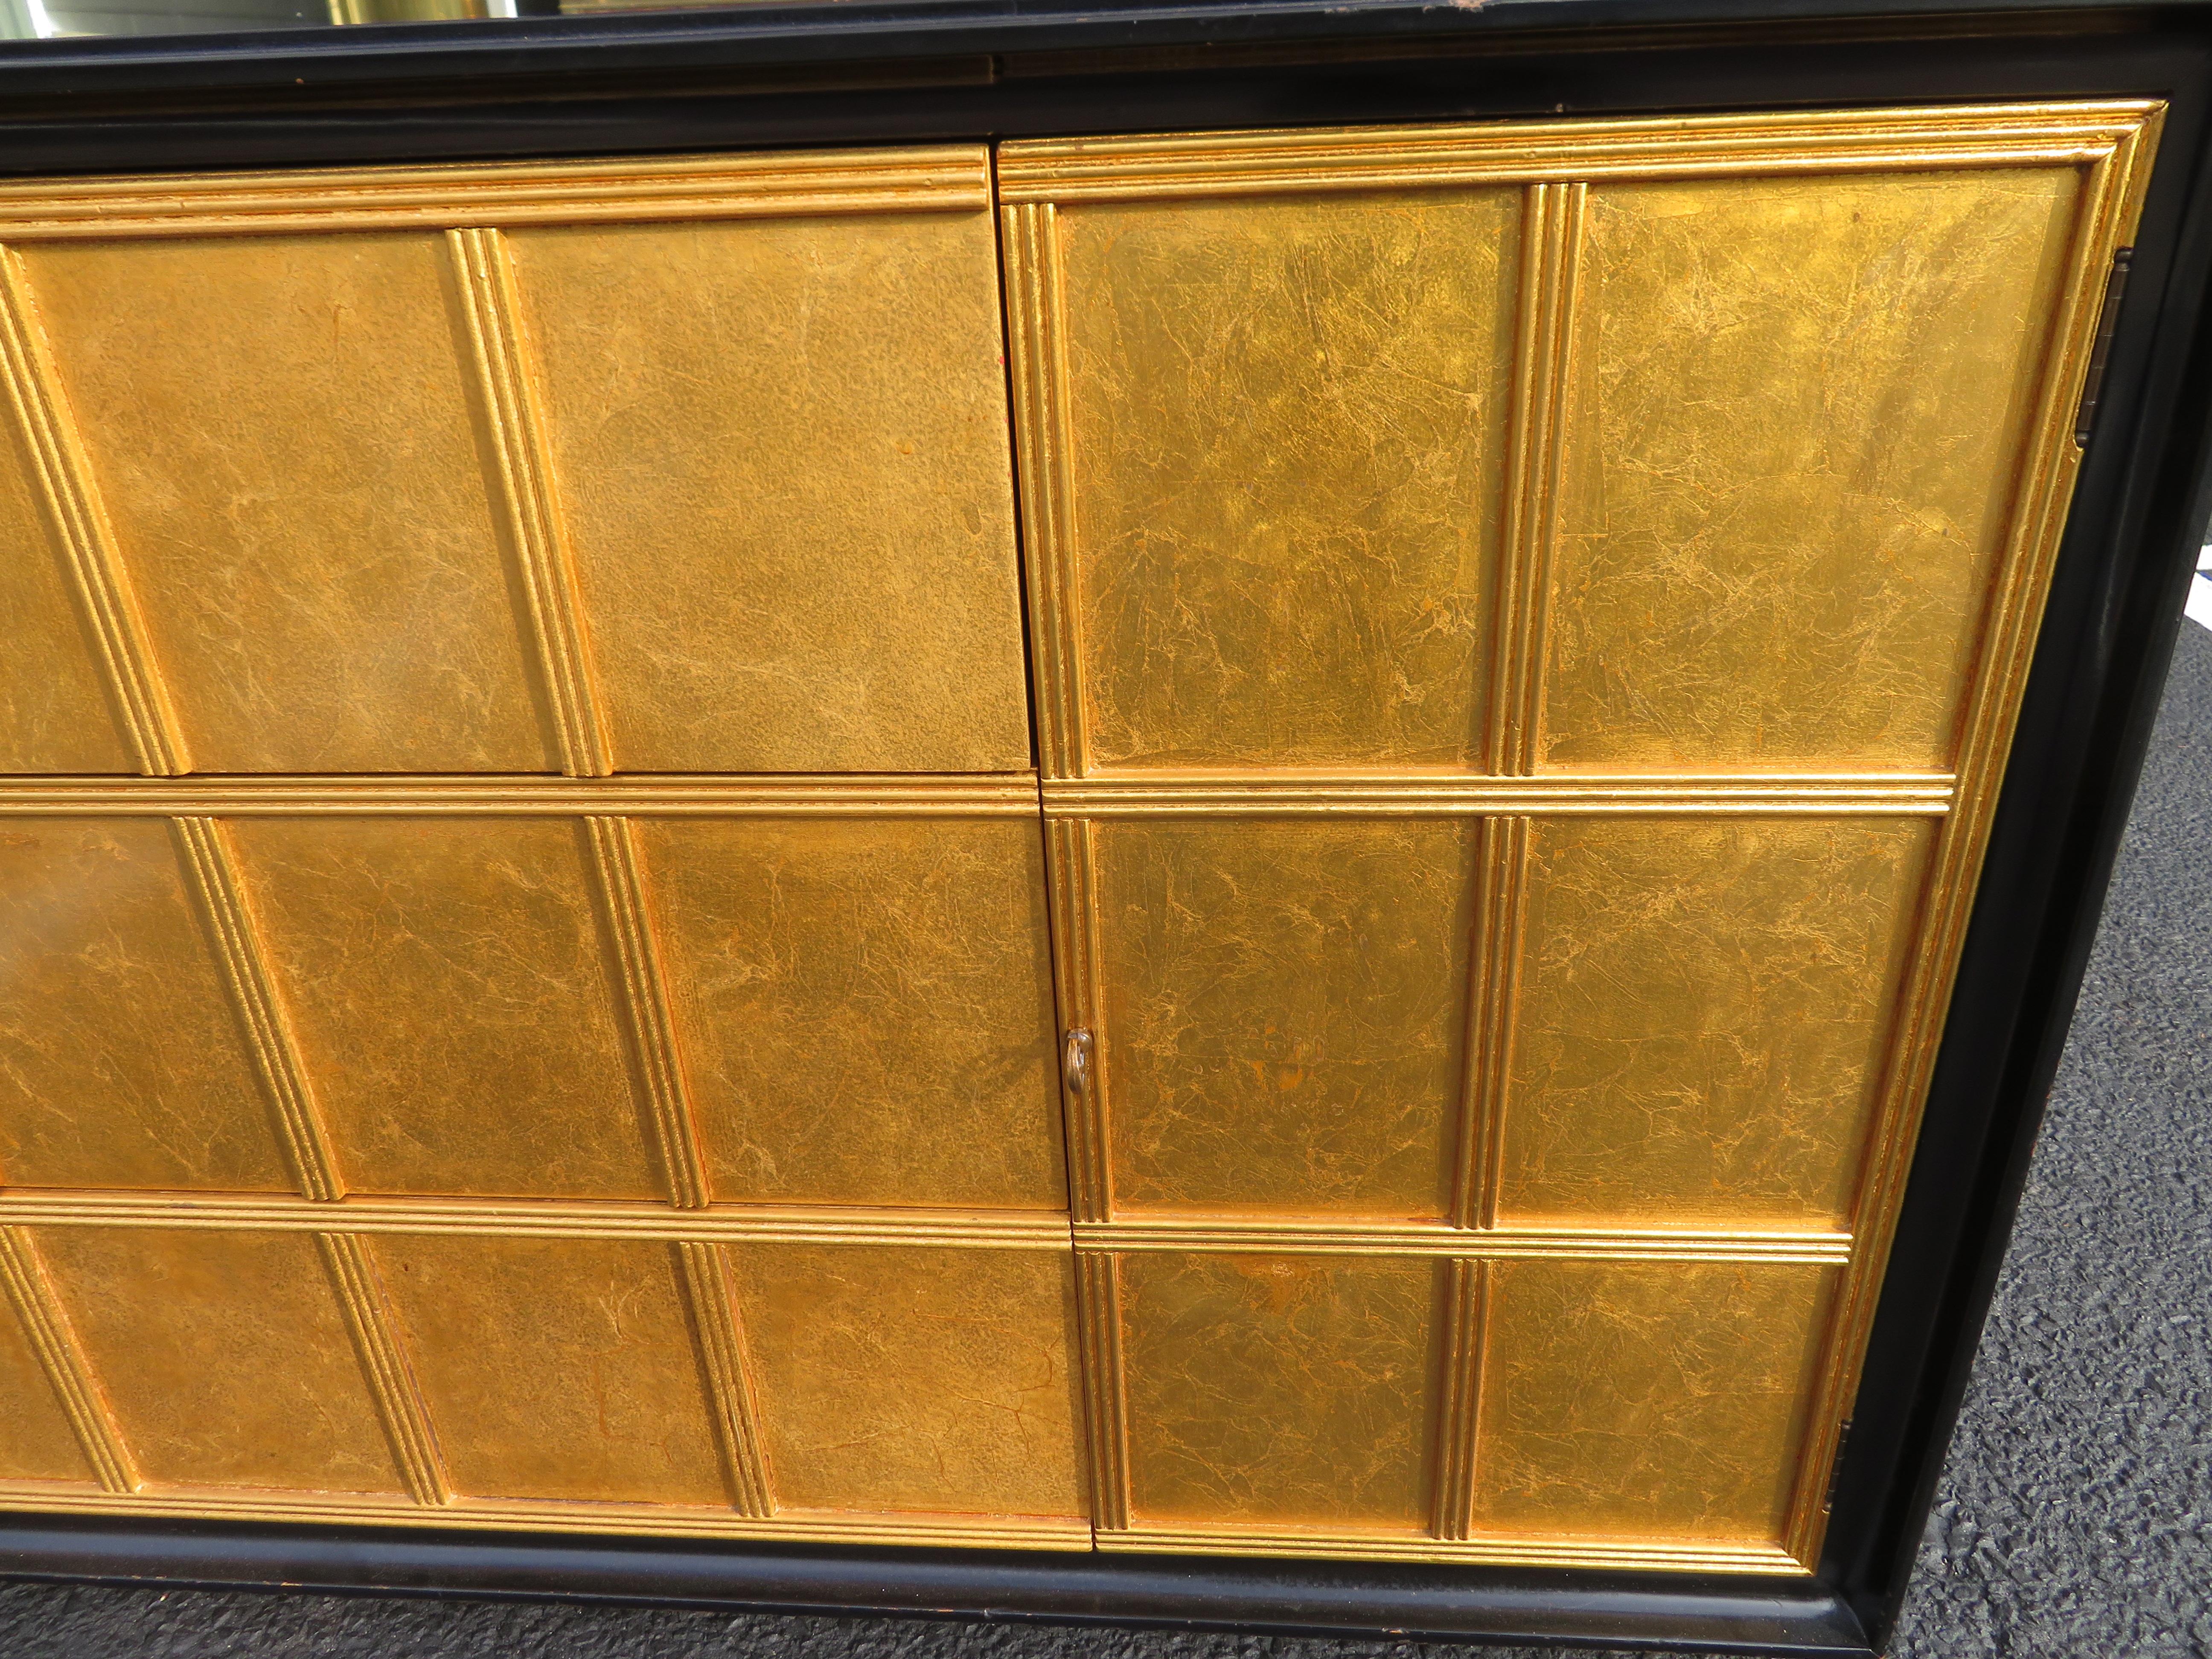 Lovely Dorothy Draper Style Gold Leaf Front Buffet Credenza Mid-Century Modern (Hollywood Regency)